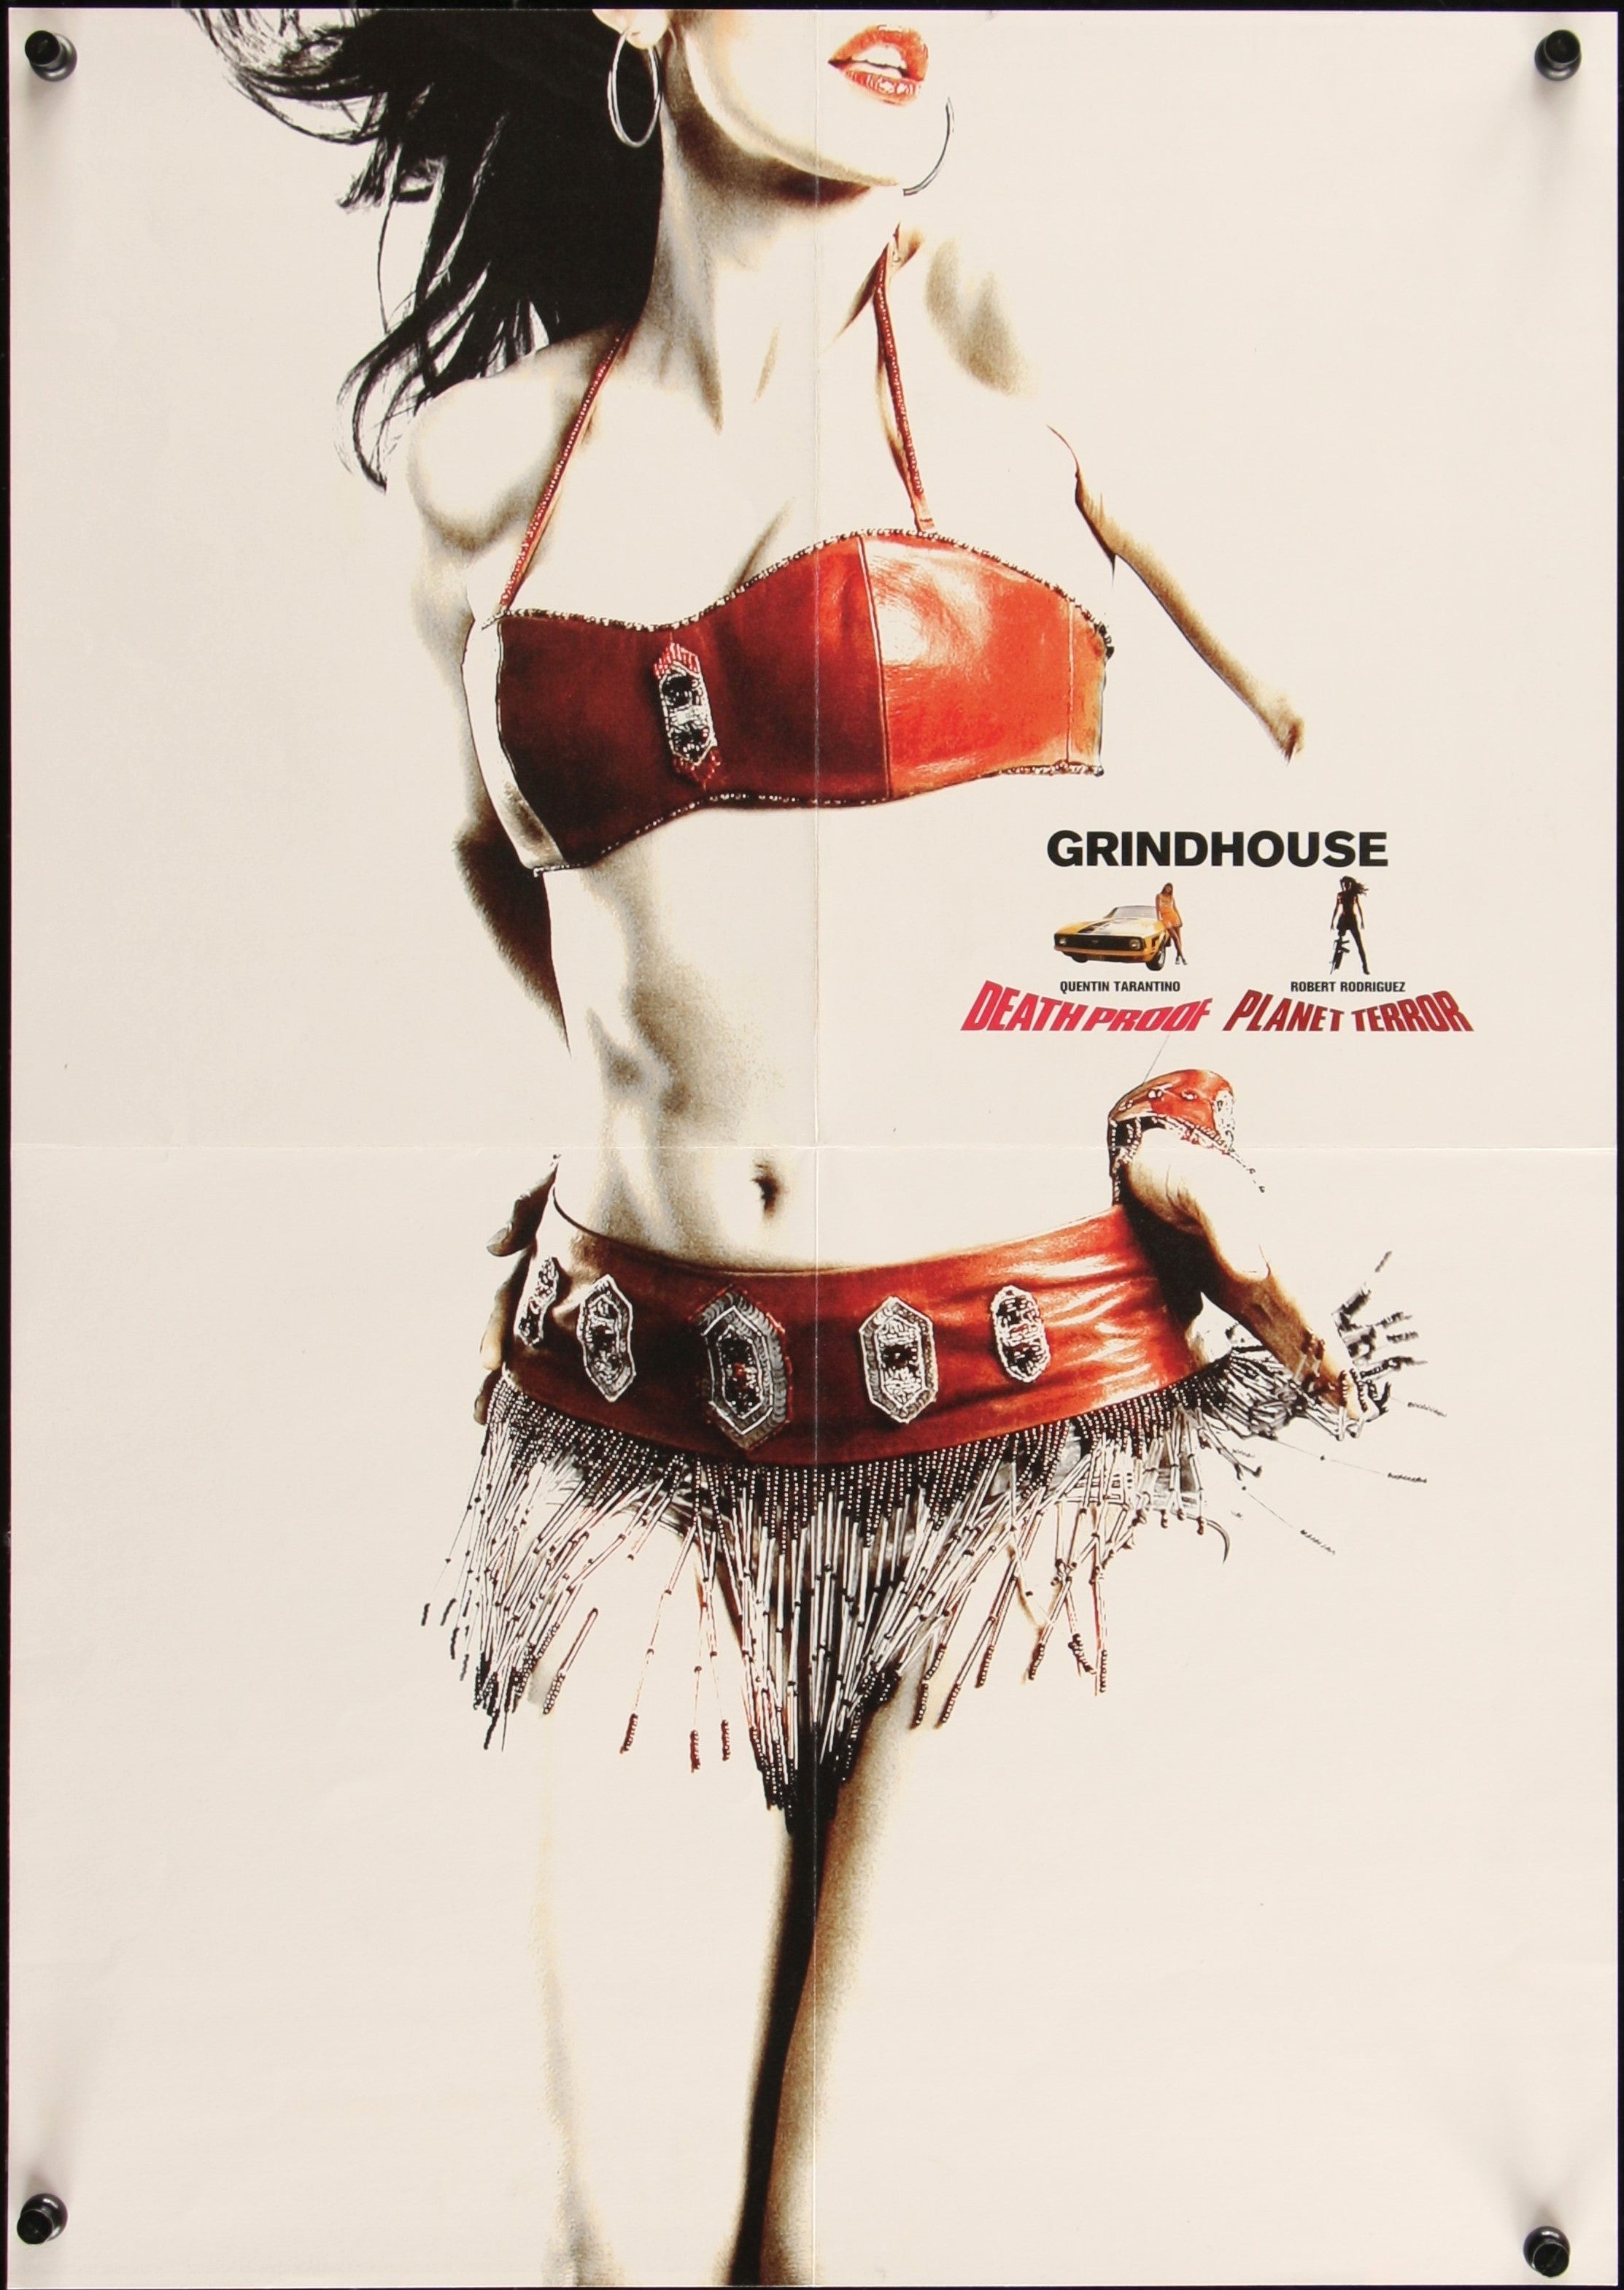 GRINDHOUSE (2007)